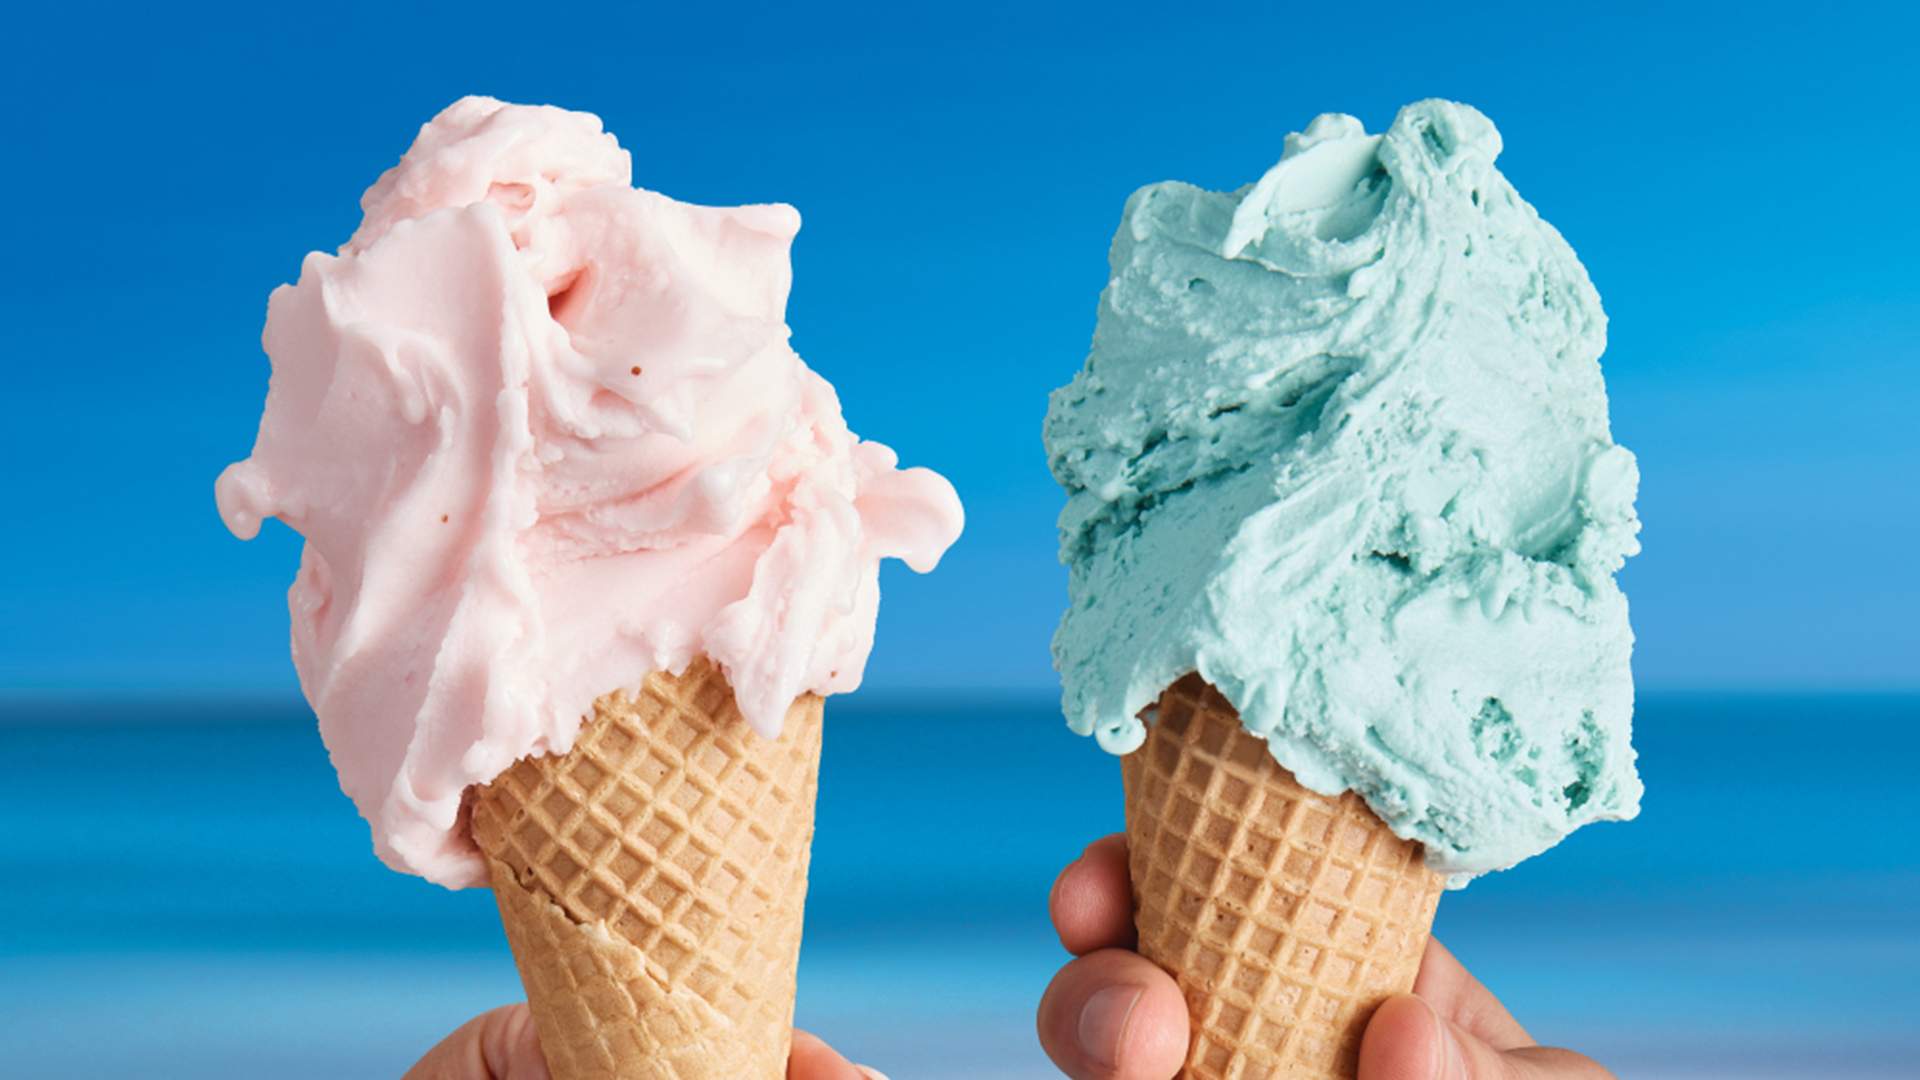 Gelatissimo Wants to Pay You $500 to Spend a Morning Taste-Testing New Gelato Flavours